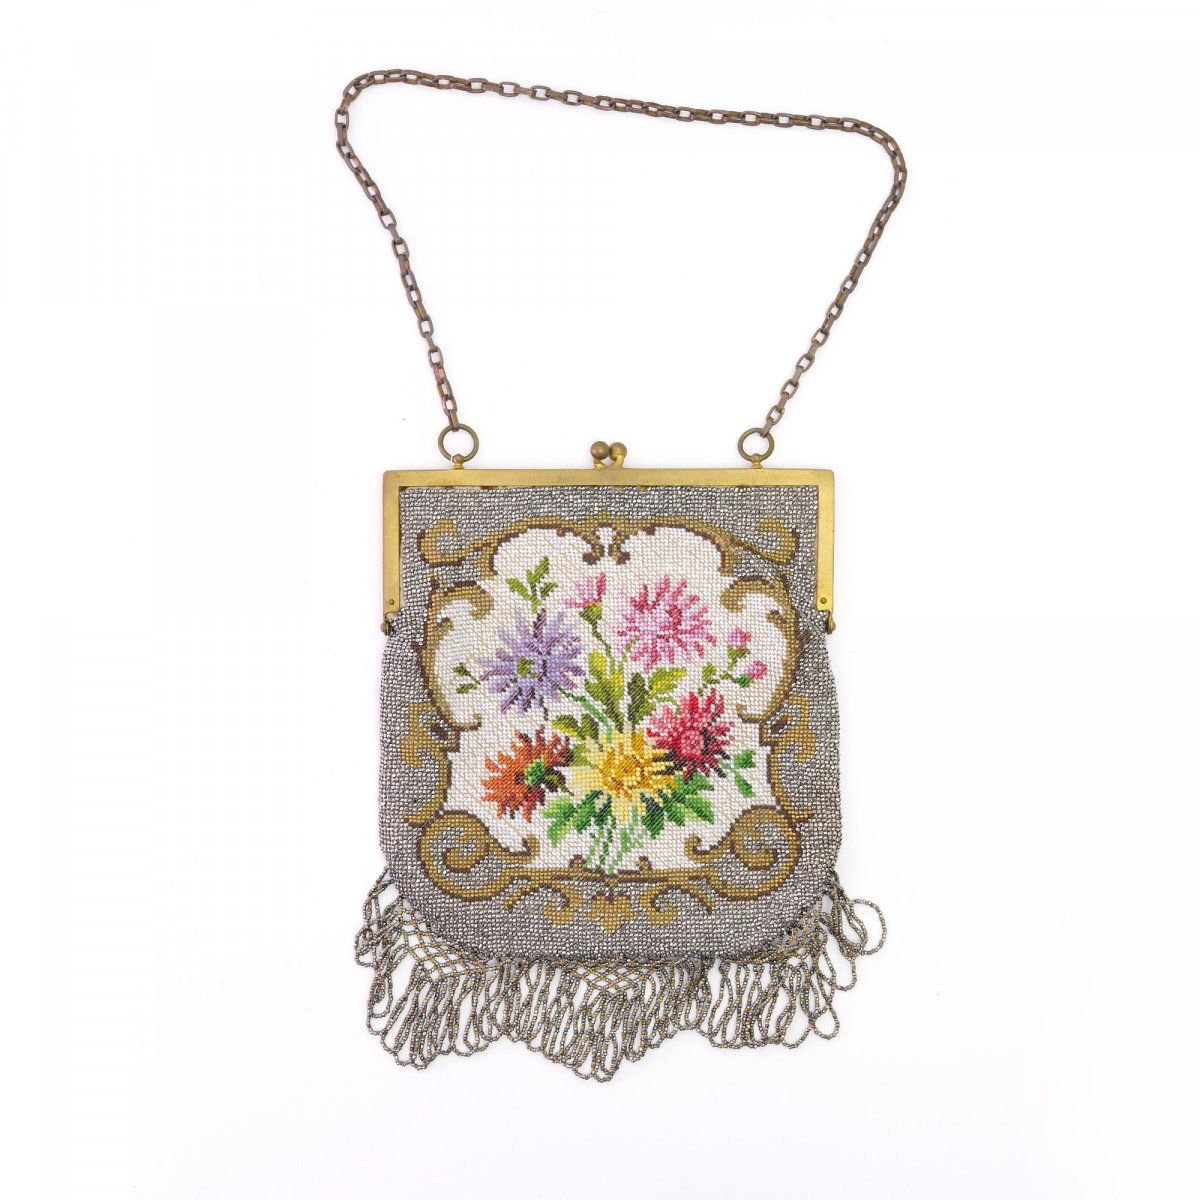 Null Bag with a bouquet of flowers, c. 1890, H. 20 x 15 cm. Polychrome beaded em&hellip;